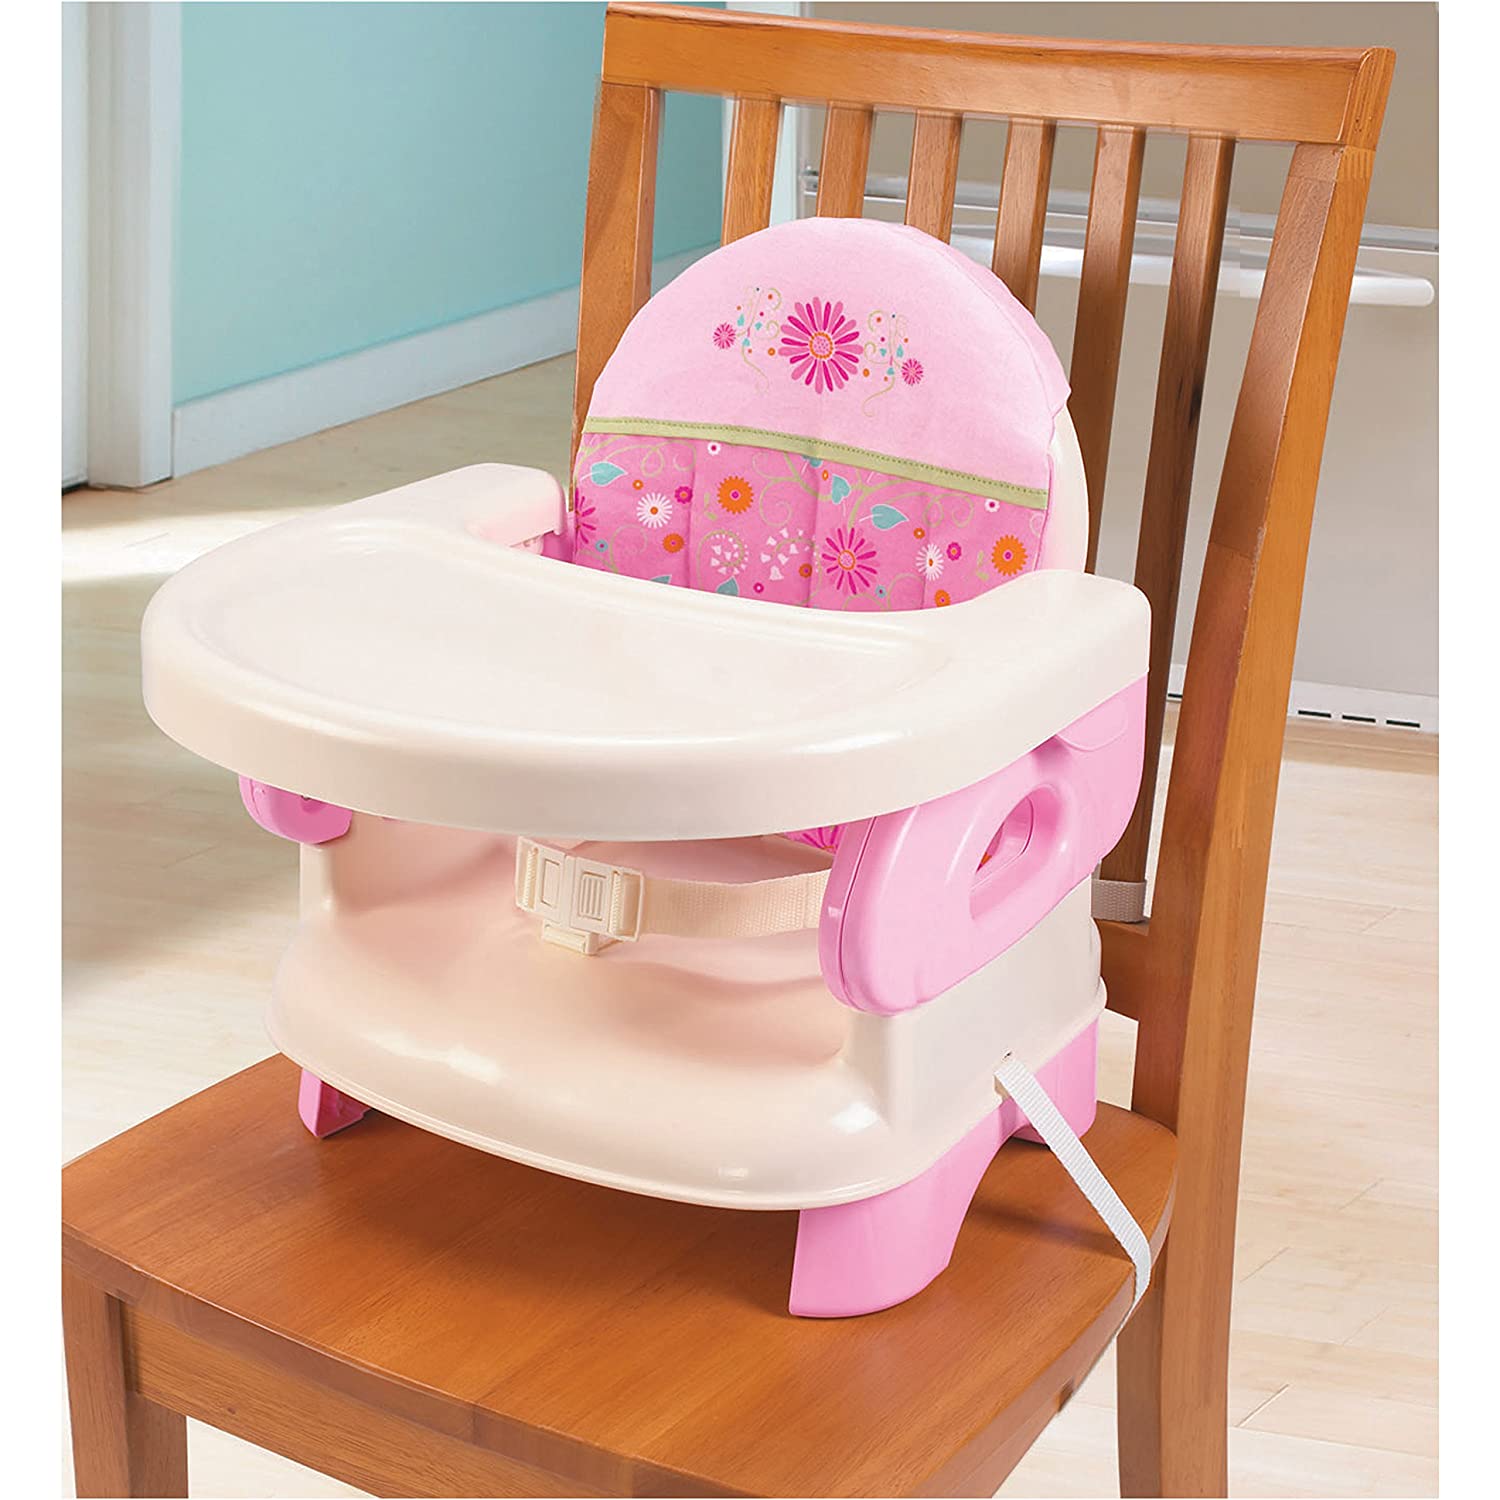 Summer Infant Deluxe Comfort Folding Booster Seat Pink Happiness: 3-point restraint system, Chair straps secure booster to chair - 13060B